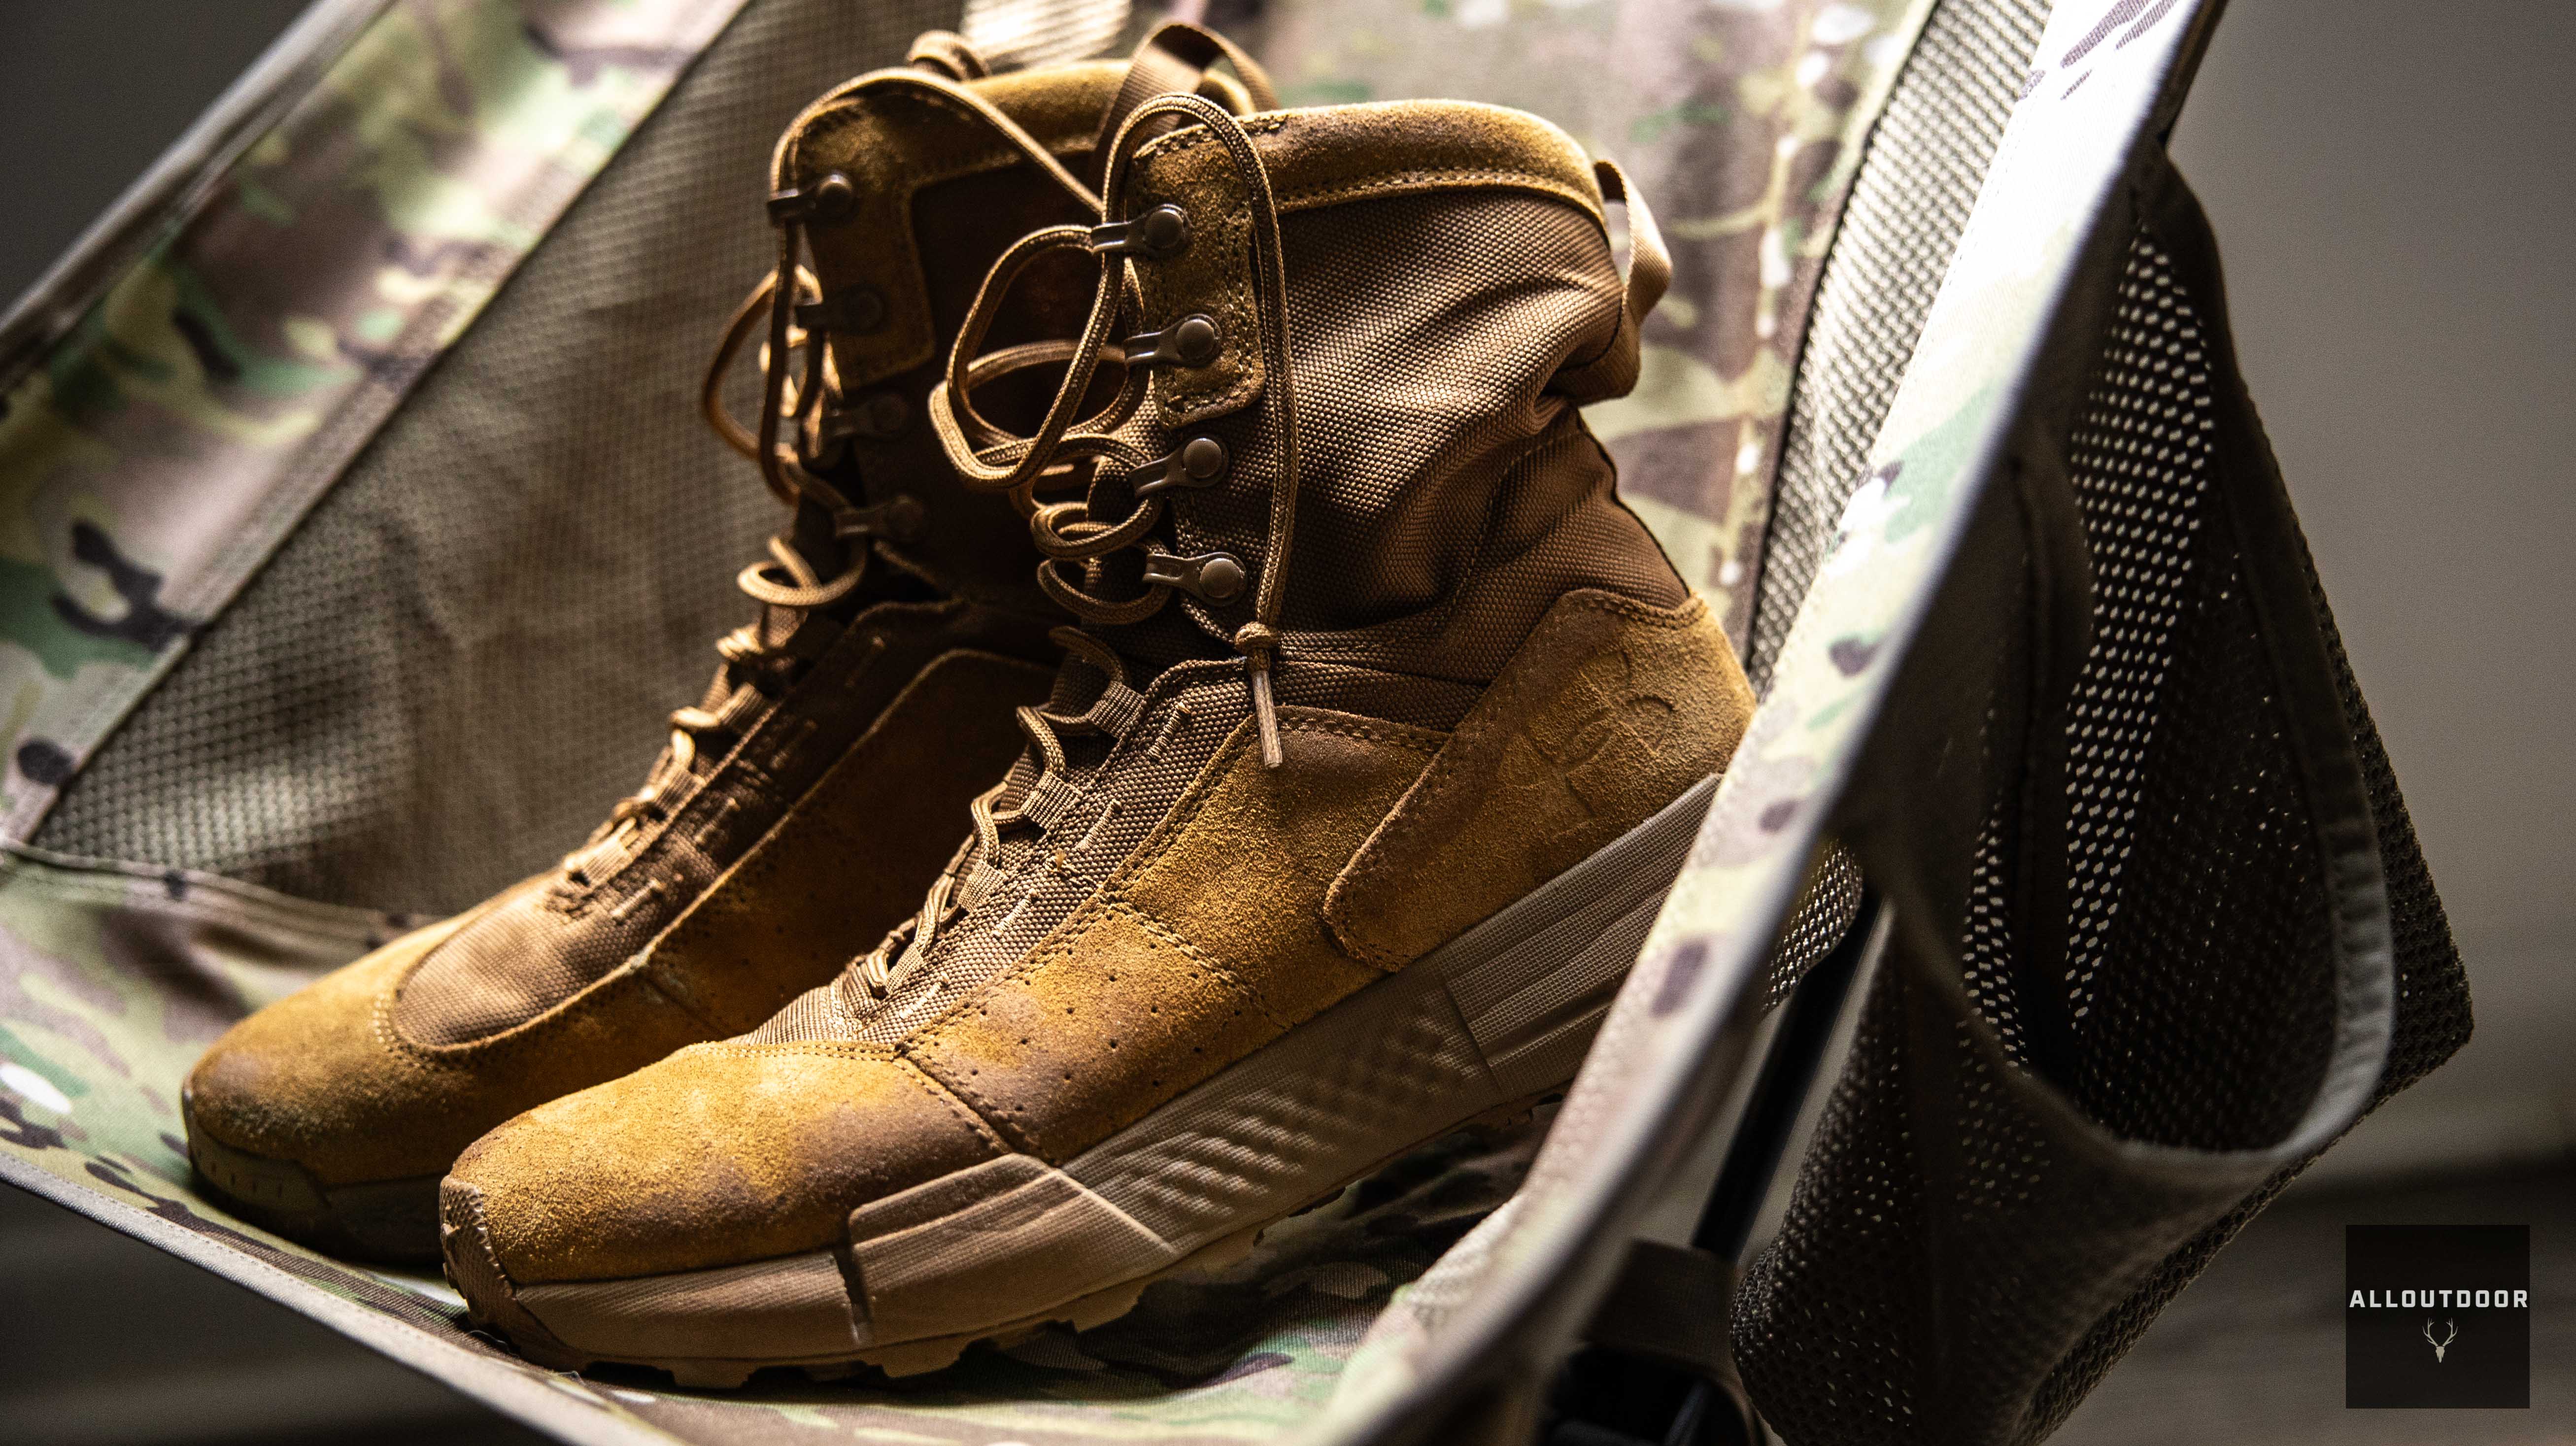 AO Review: Under Armour Charged Loadout Boots - "Military Compliant"